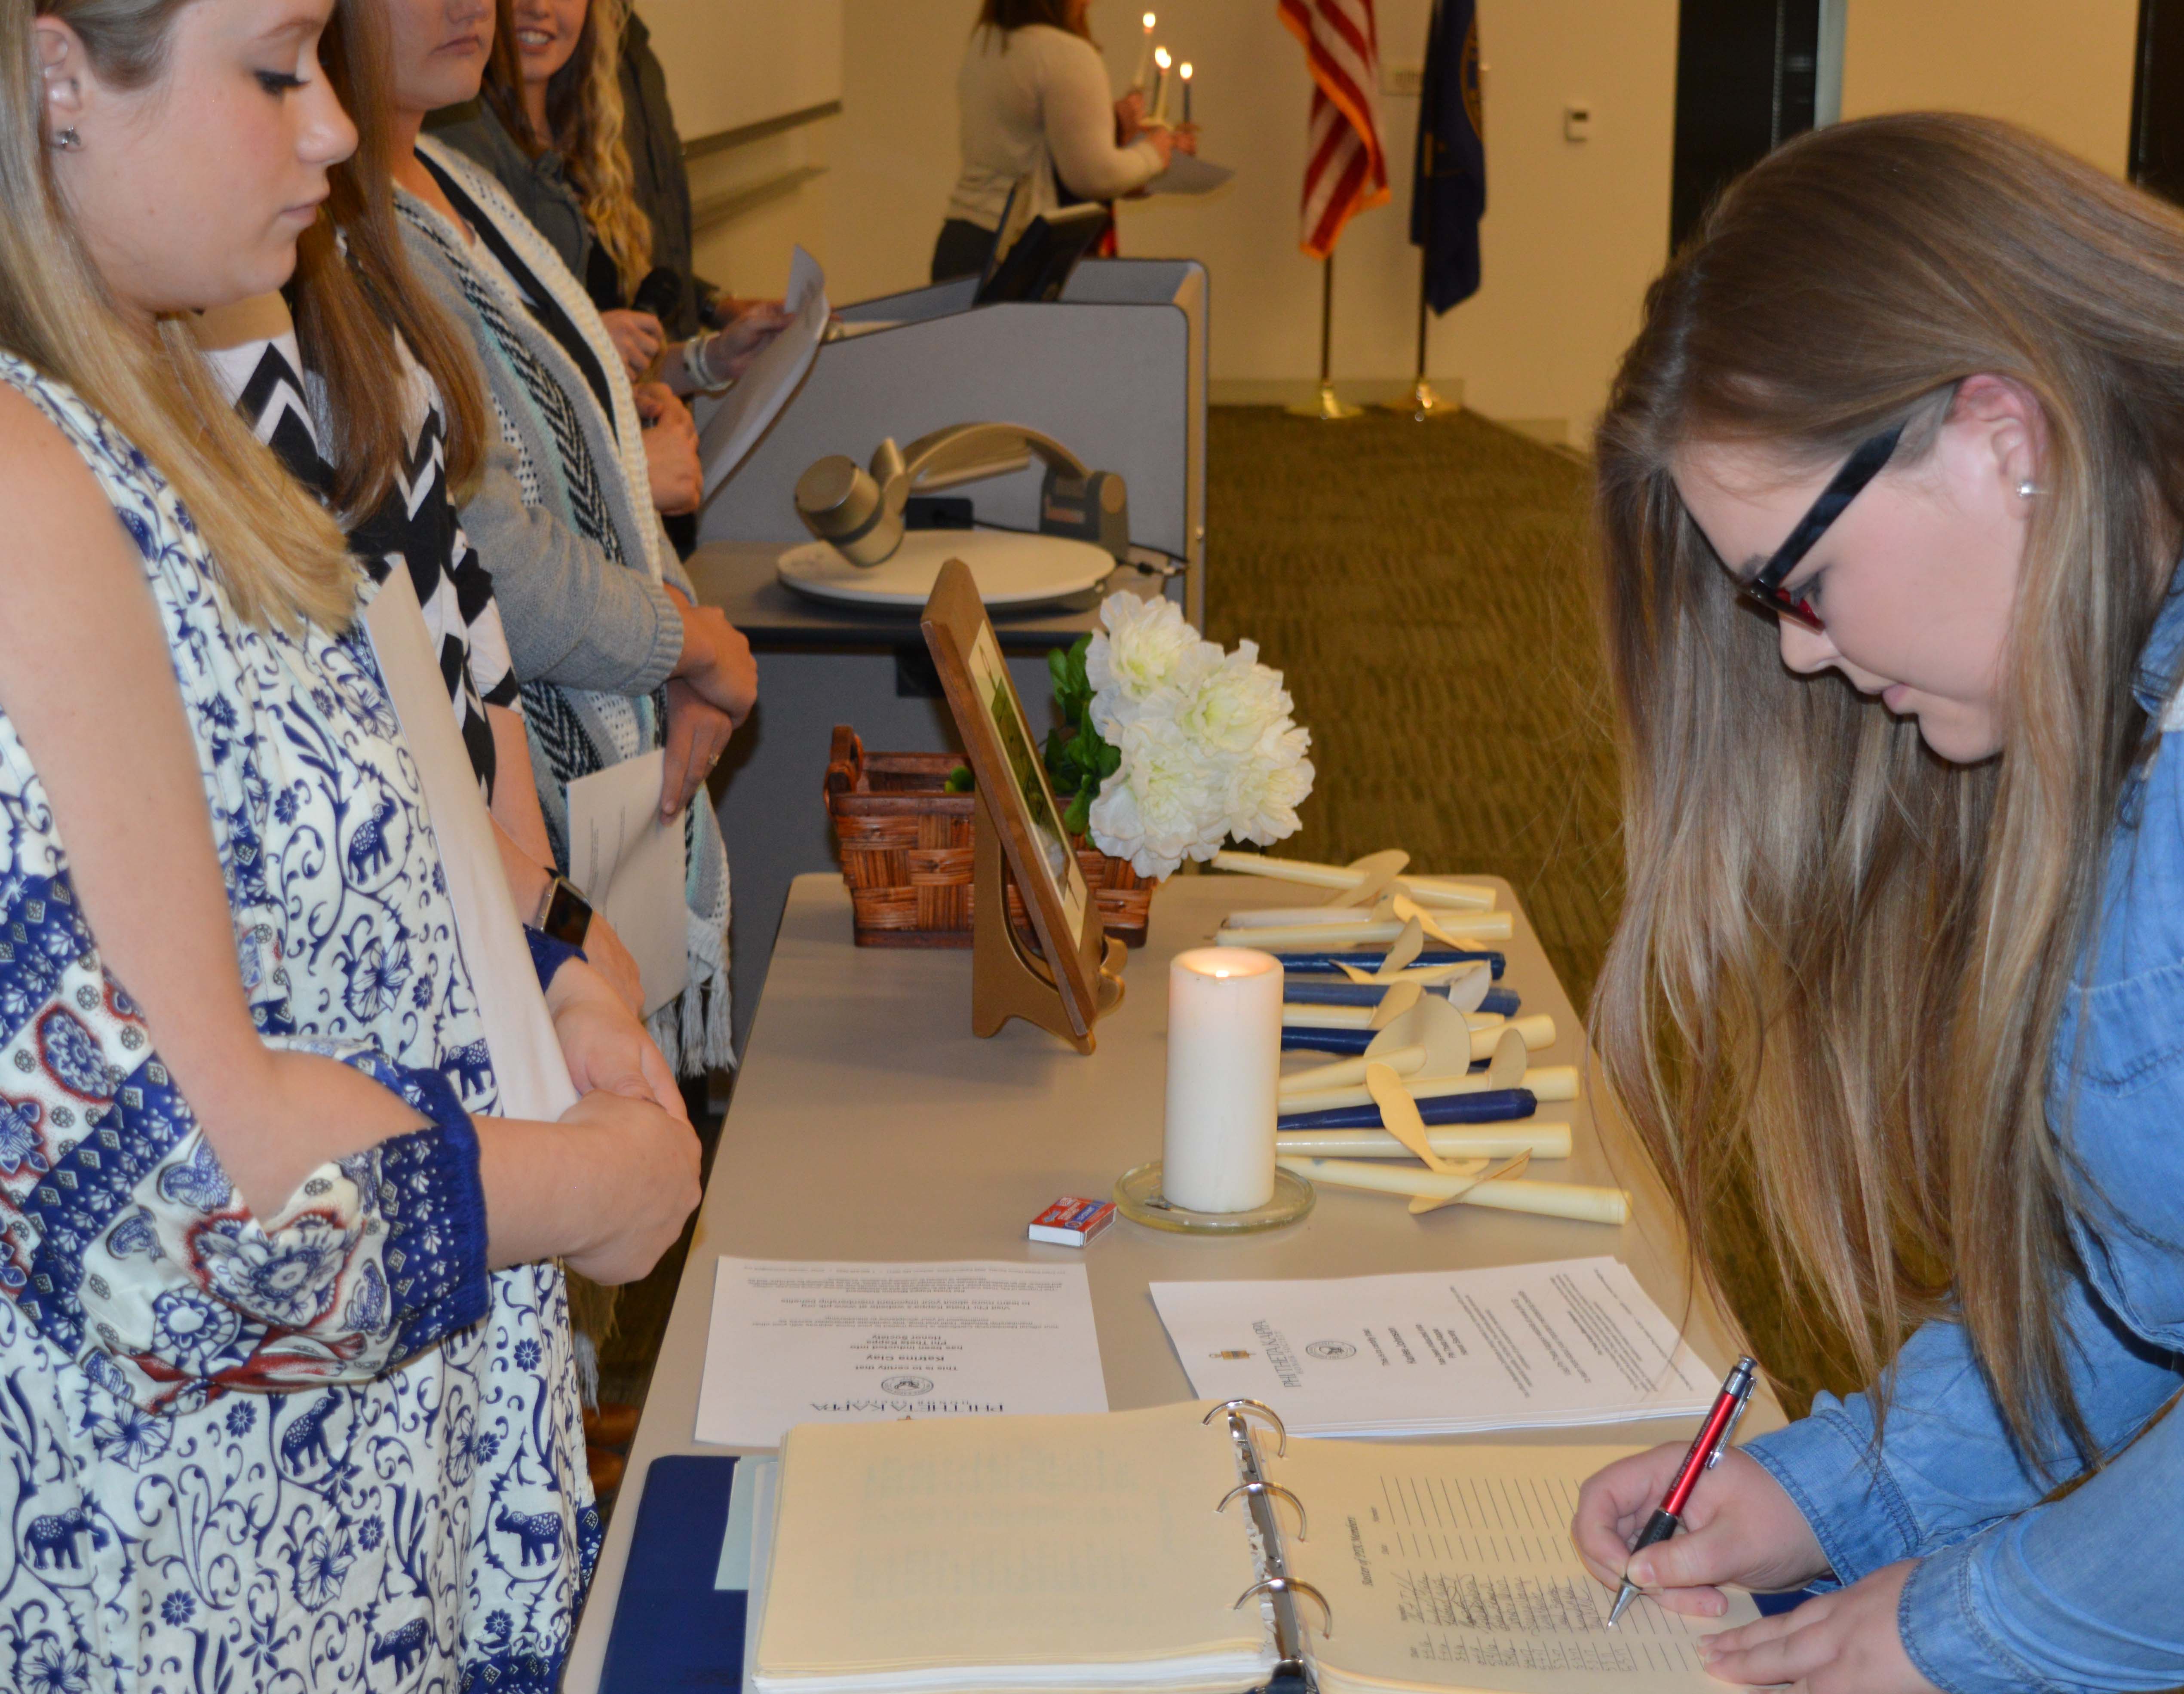 Academic achievement at NCTA is recognized by membership into the Alpha Iota Tau chapter of Phi Theta Kappa academic honorary. Initiation will be May 1 at NCTA. (Crawford/ NCTA News Photo)